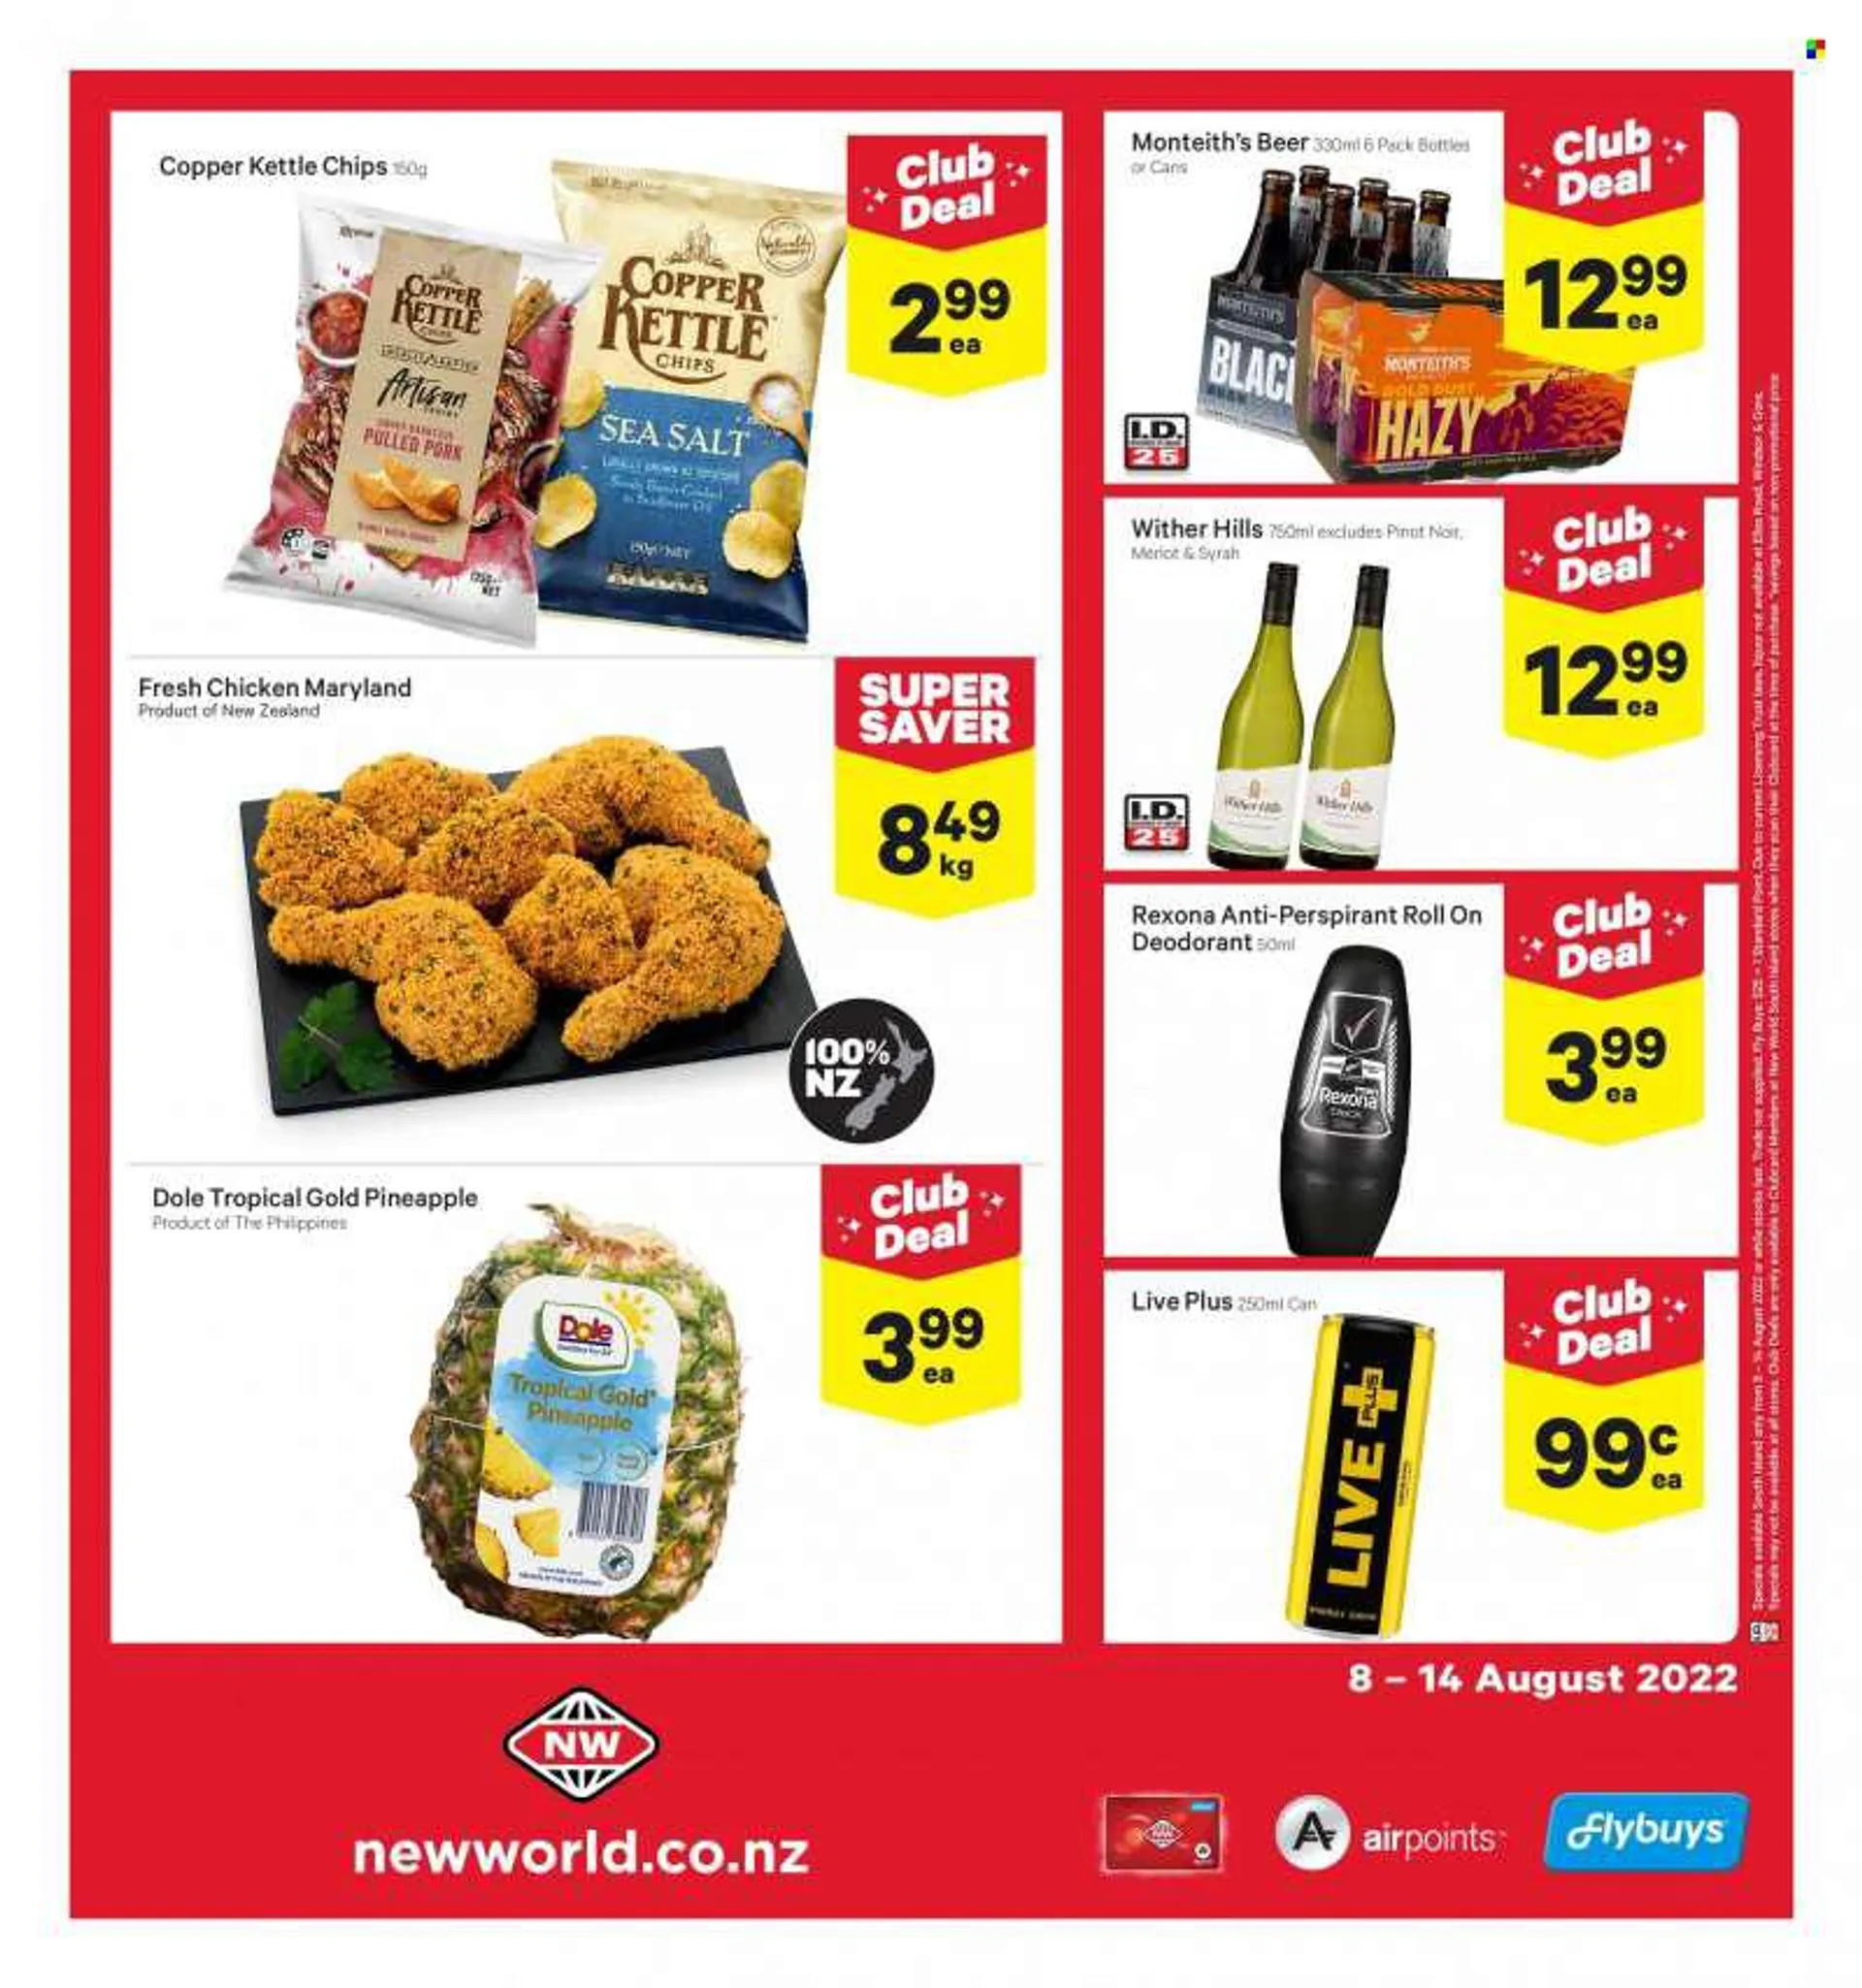 New World mailer - 08.08.2022 - 14.08.2022 - Sales products - Dole, pineapple, chips, kettle, Copper Kettle, red wine, wine, Merlot, Pinot Noir, Wither Hills, Syrah, beer, anti-perspirant, Rexona, roll-on, deodorant, Hills. Page 2.